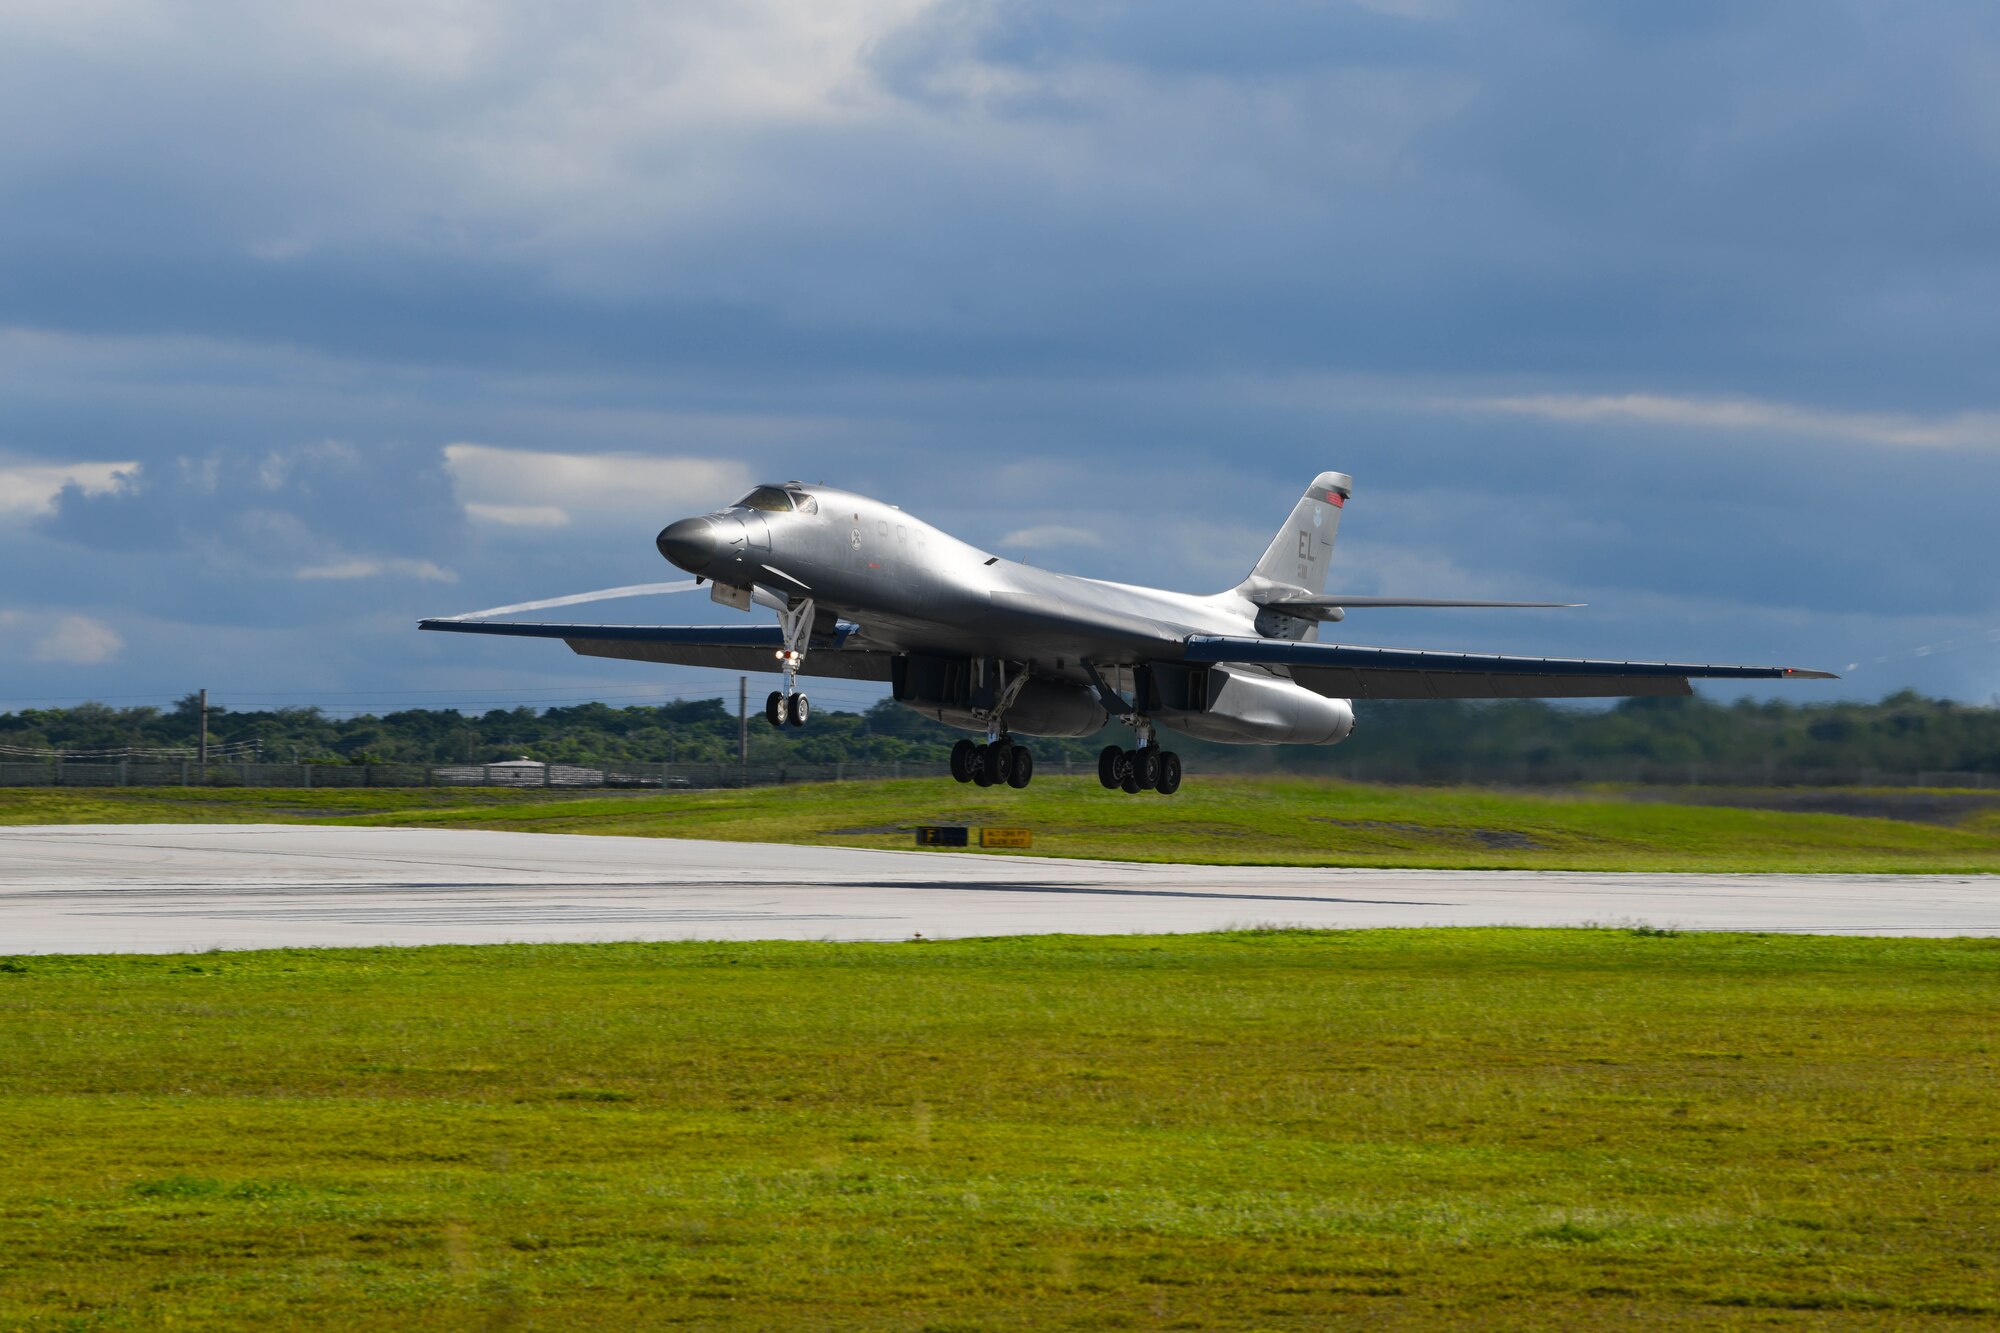 A B-1B Lancer assigned to the 34th Bomb Squadron, Ellsworth Air Force Base, S.D., lands at Andersen AFB, Guam, for a Bomber Task Force deployment, Sept. 10, 2020. The BTF is deployed to Andersen AFB to support Pacific Air Forces’ training efforts with allies, partners and joint forces; and strategic deterrence missions to reinforce the rules-based order in the Indo-Pacific region. (U.S. Air Force photo by Staff Sgt. Nicolas Z. Erwin)